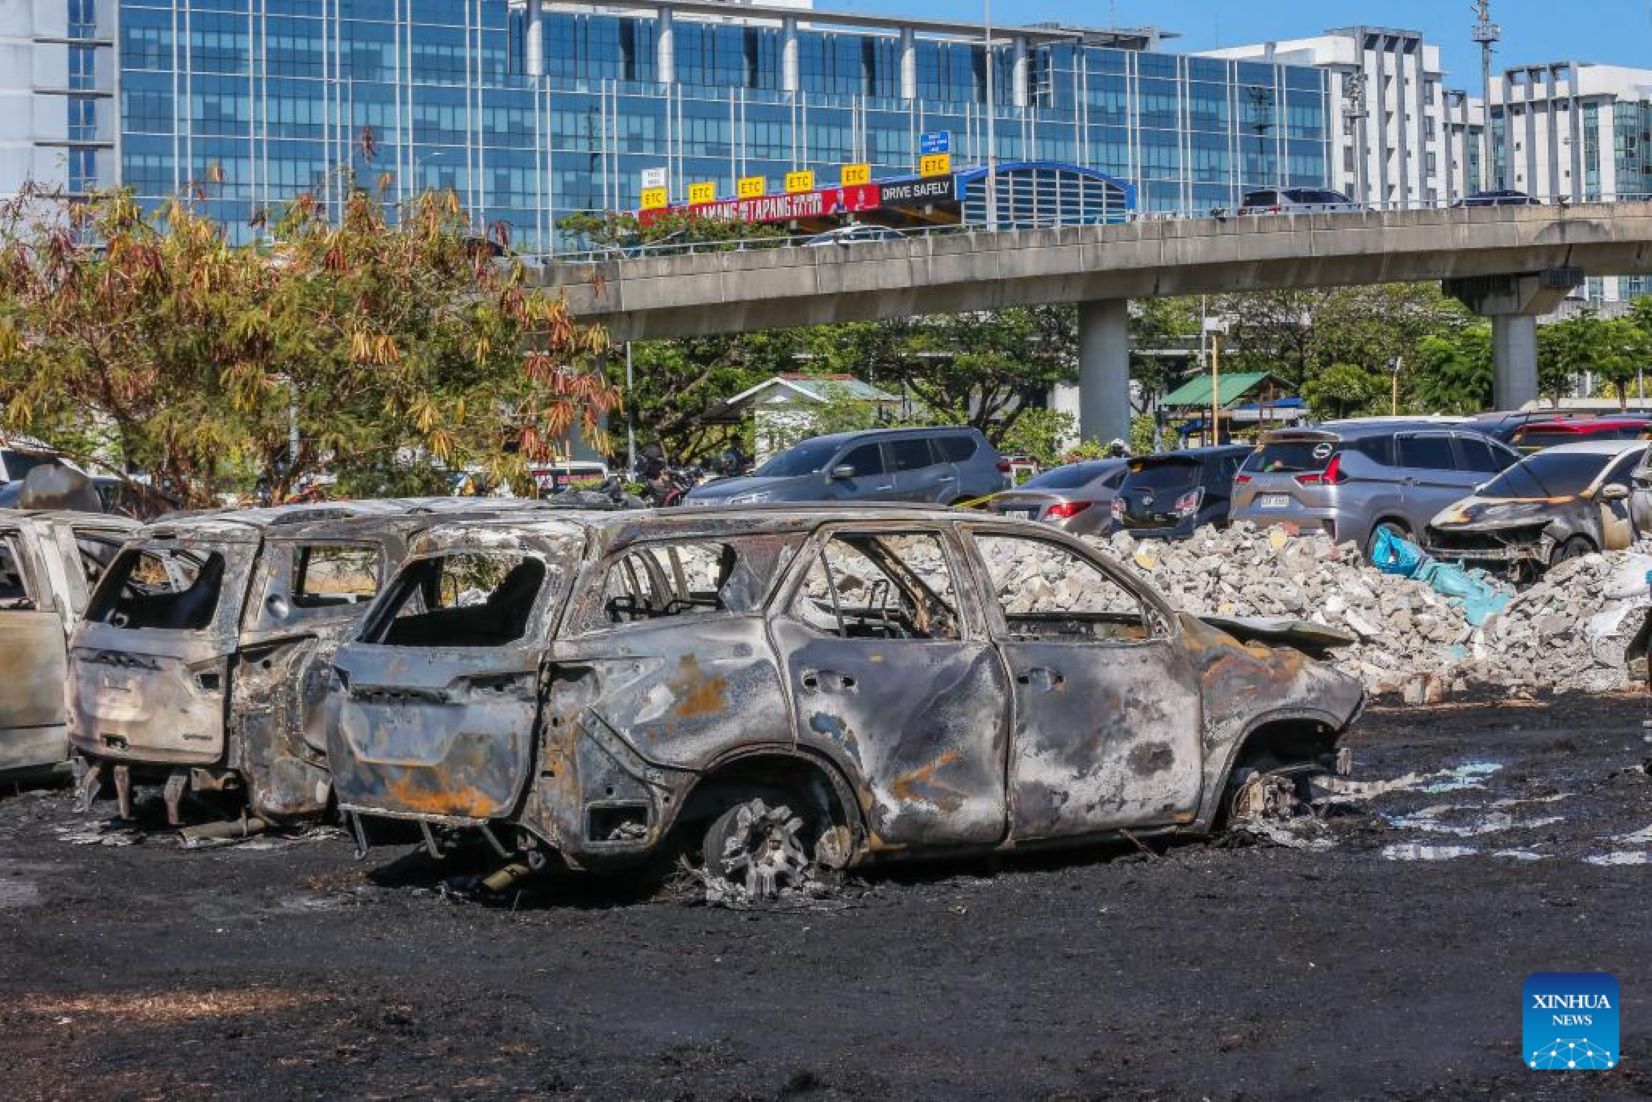 Fire Broke Out At Parking Area Of Int’l Airport In Pasay City, Philippines Burnt 19 Vehicles